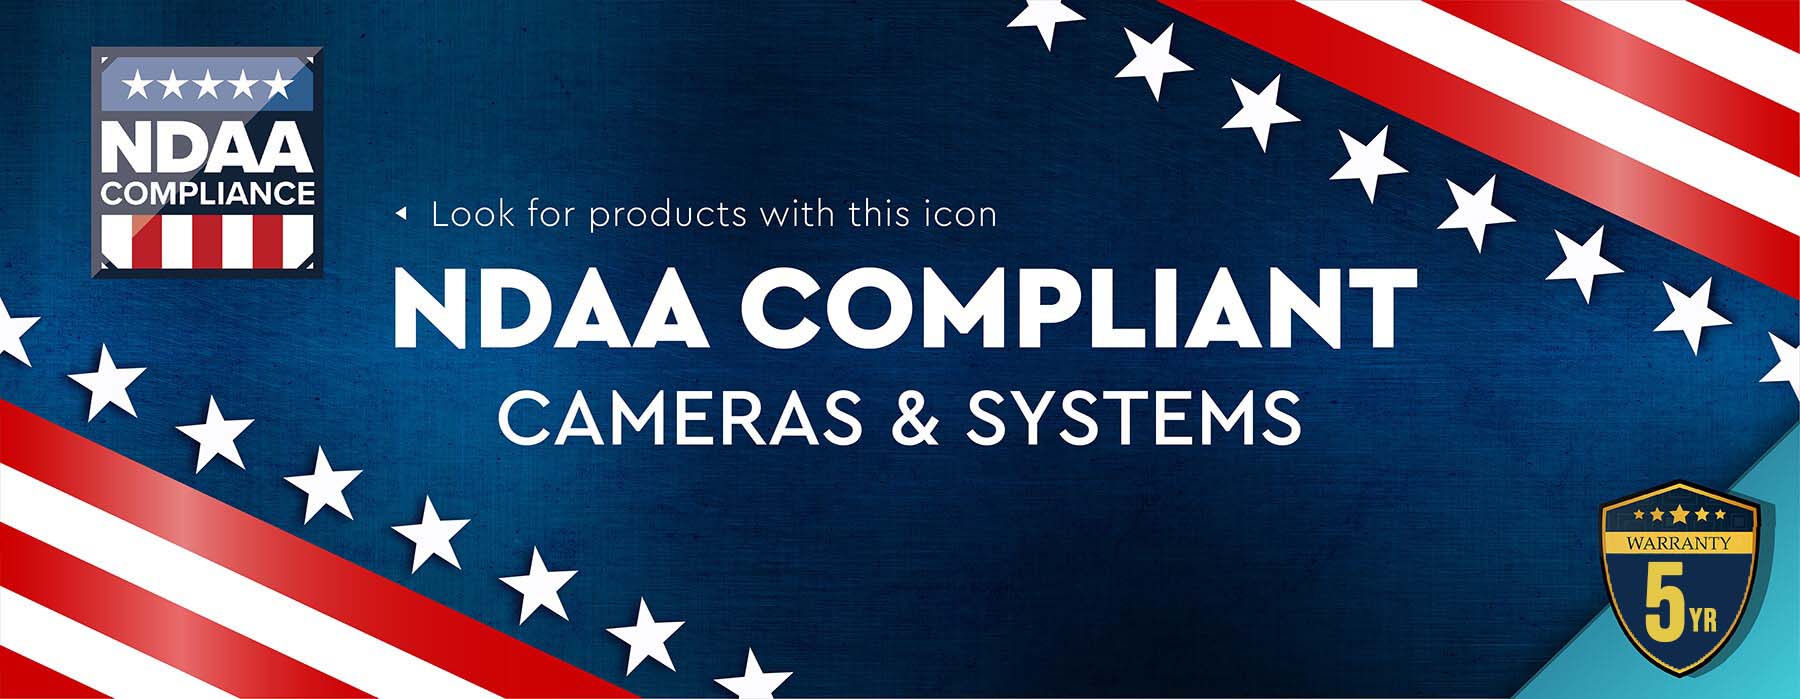 NDAA Compliant Cameras & Systems Banner